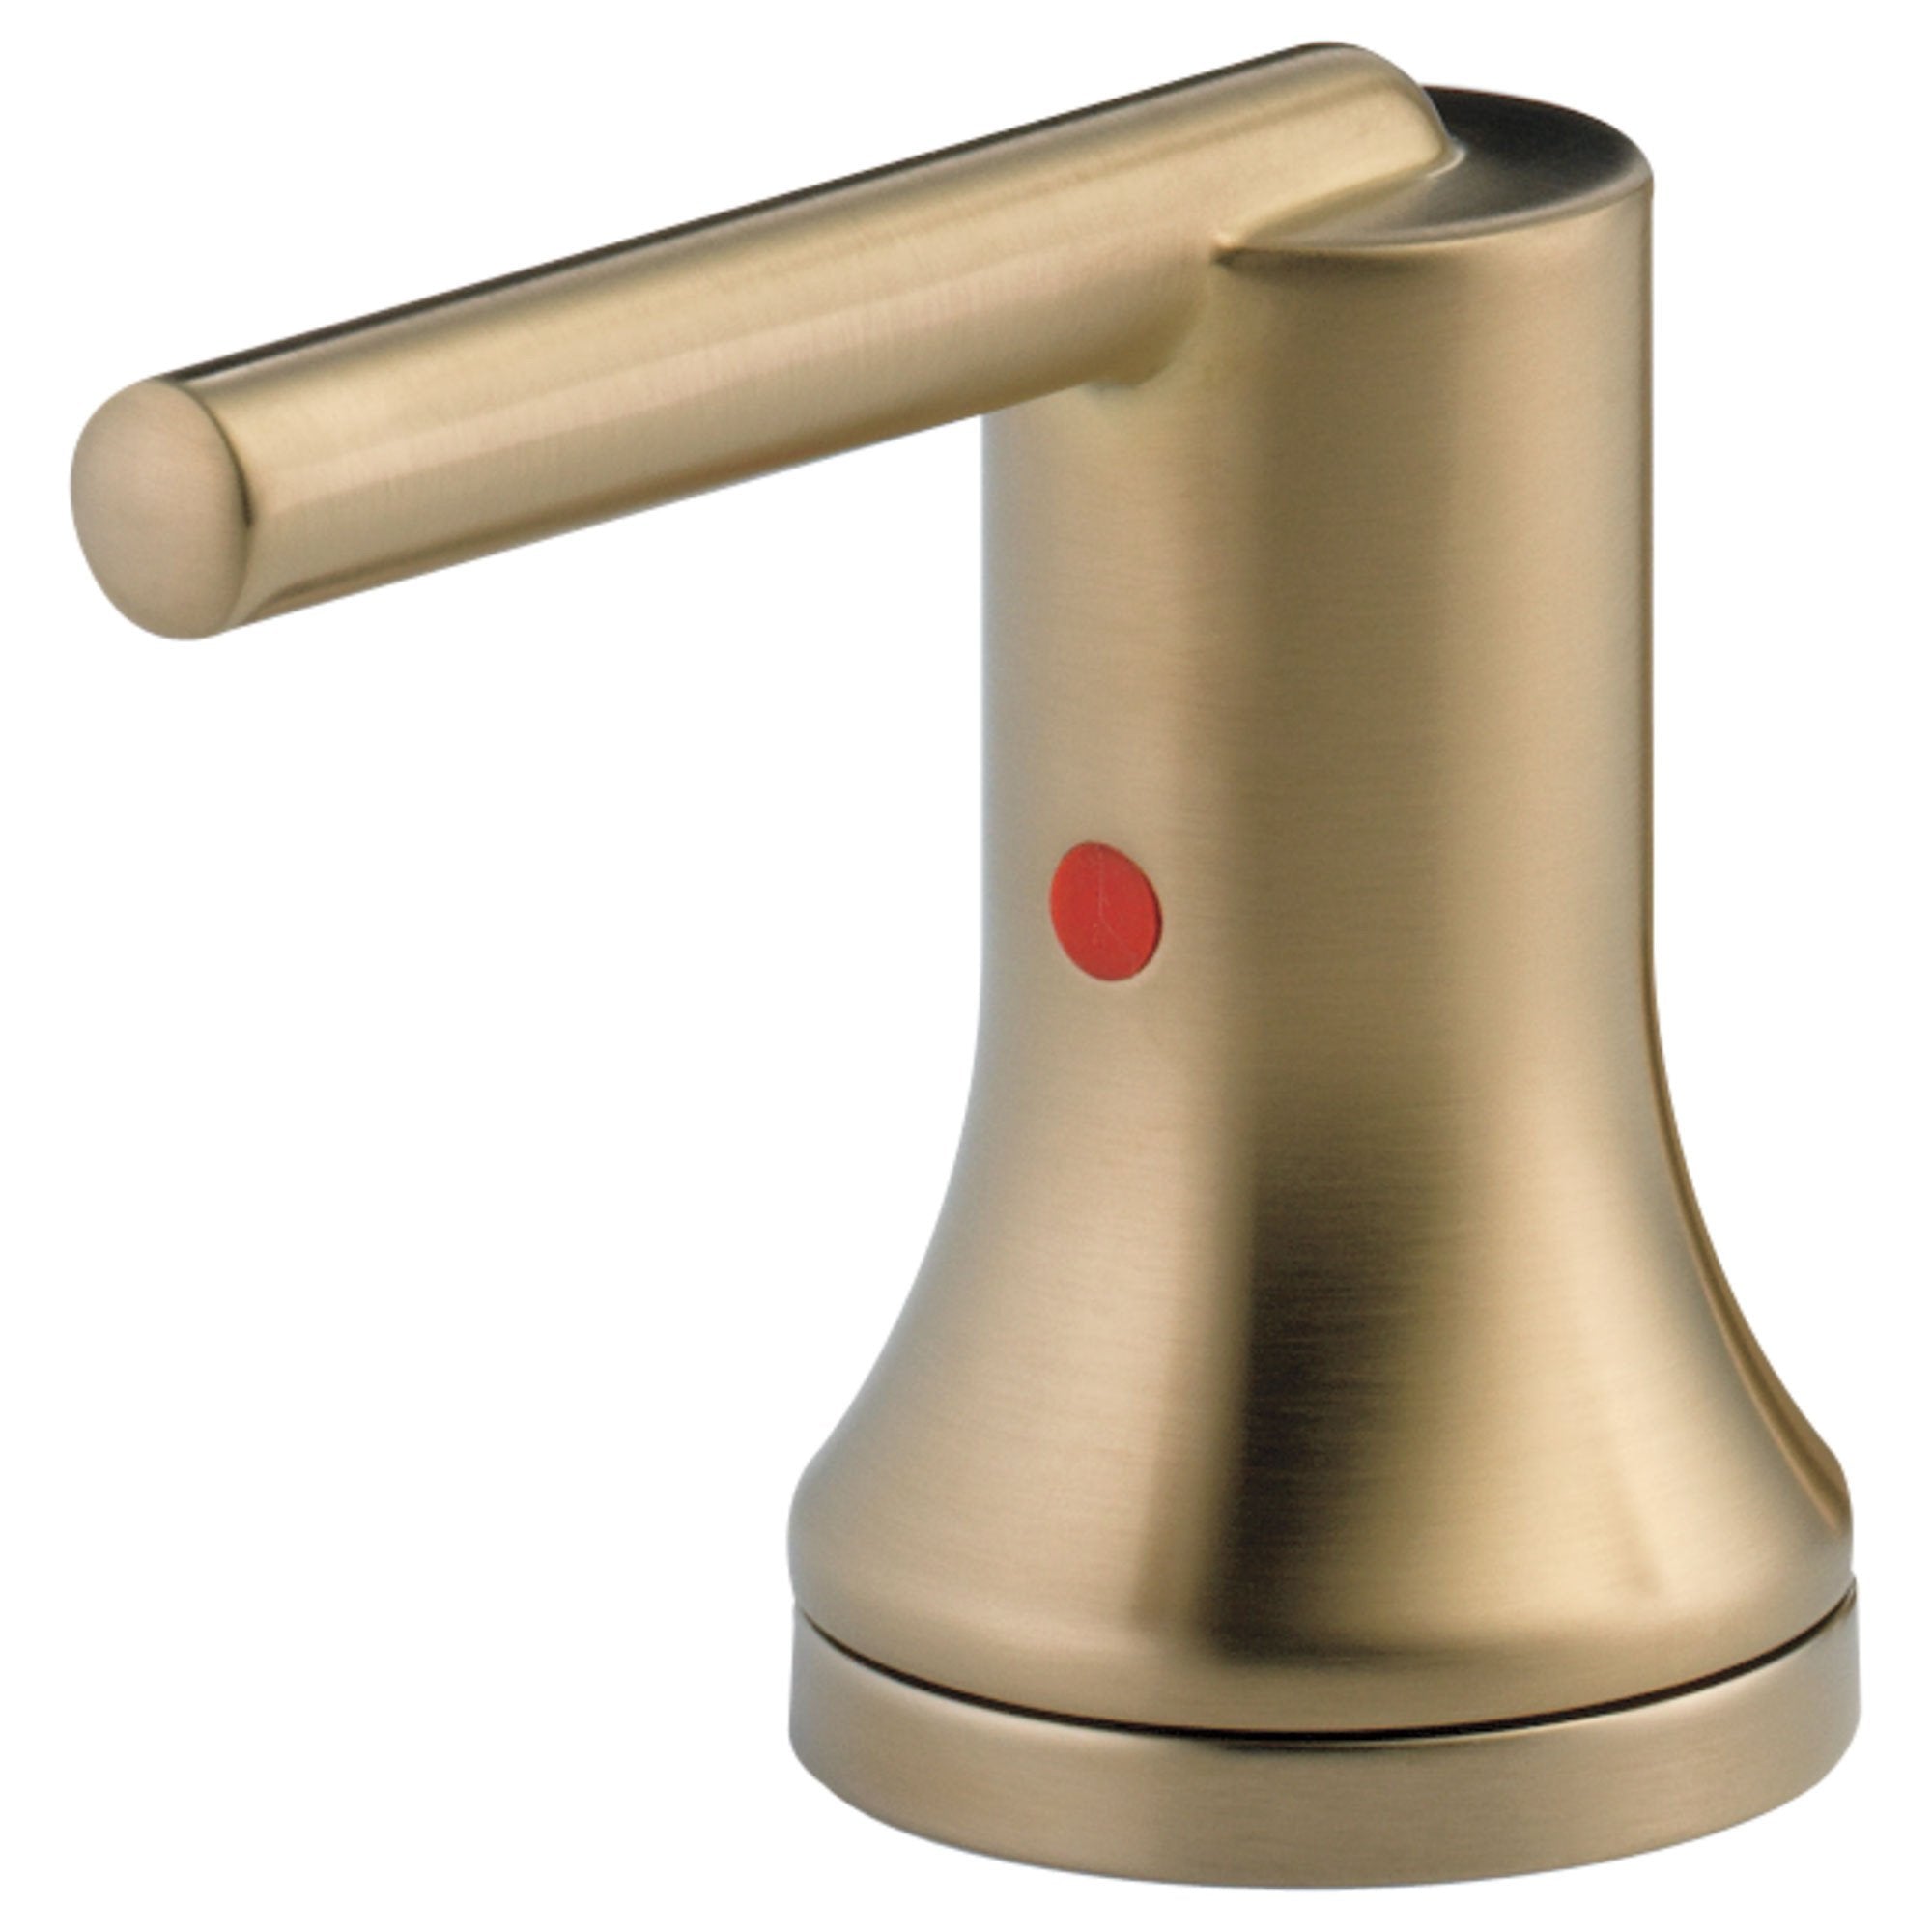 Delta Trinsic Collection Champagne Bronze Finish Lavatory Lever Handles - Quantity 2 Included DH259CZ